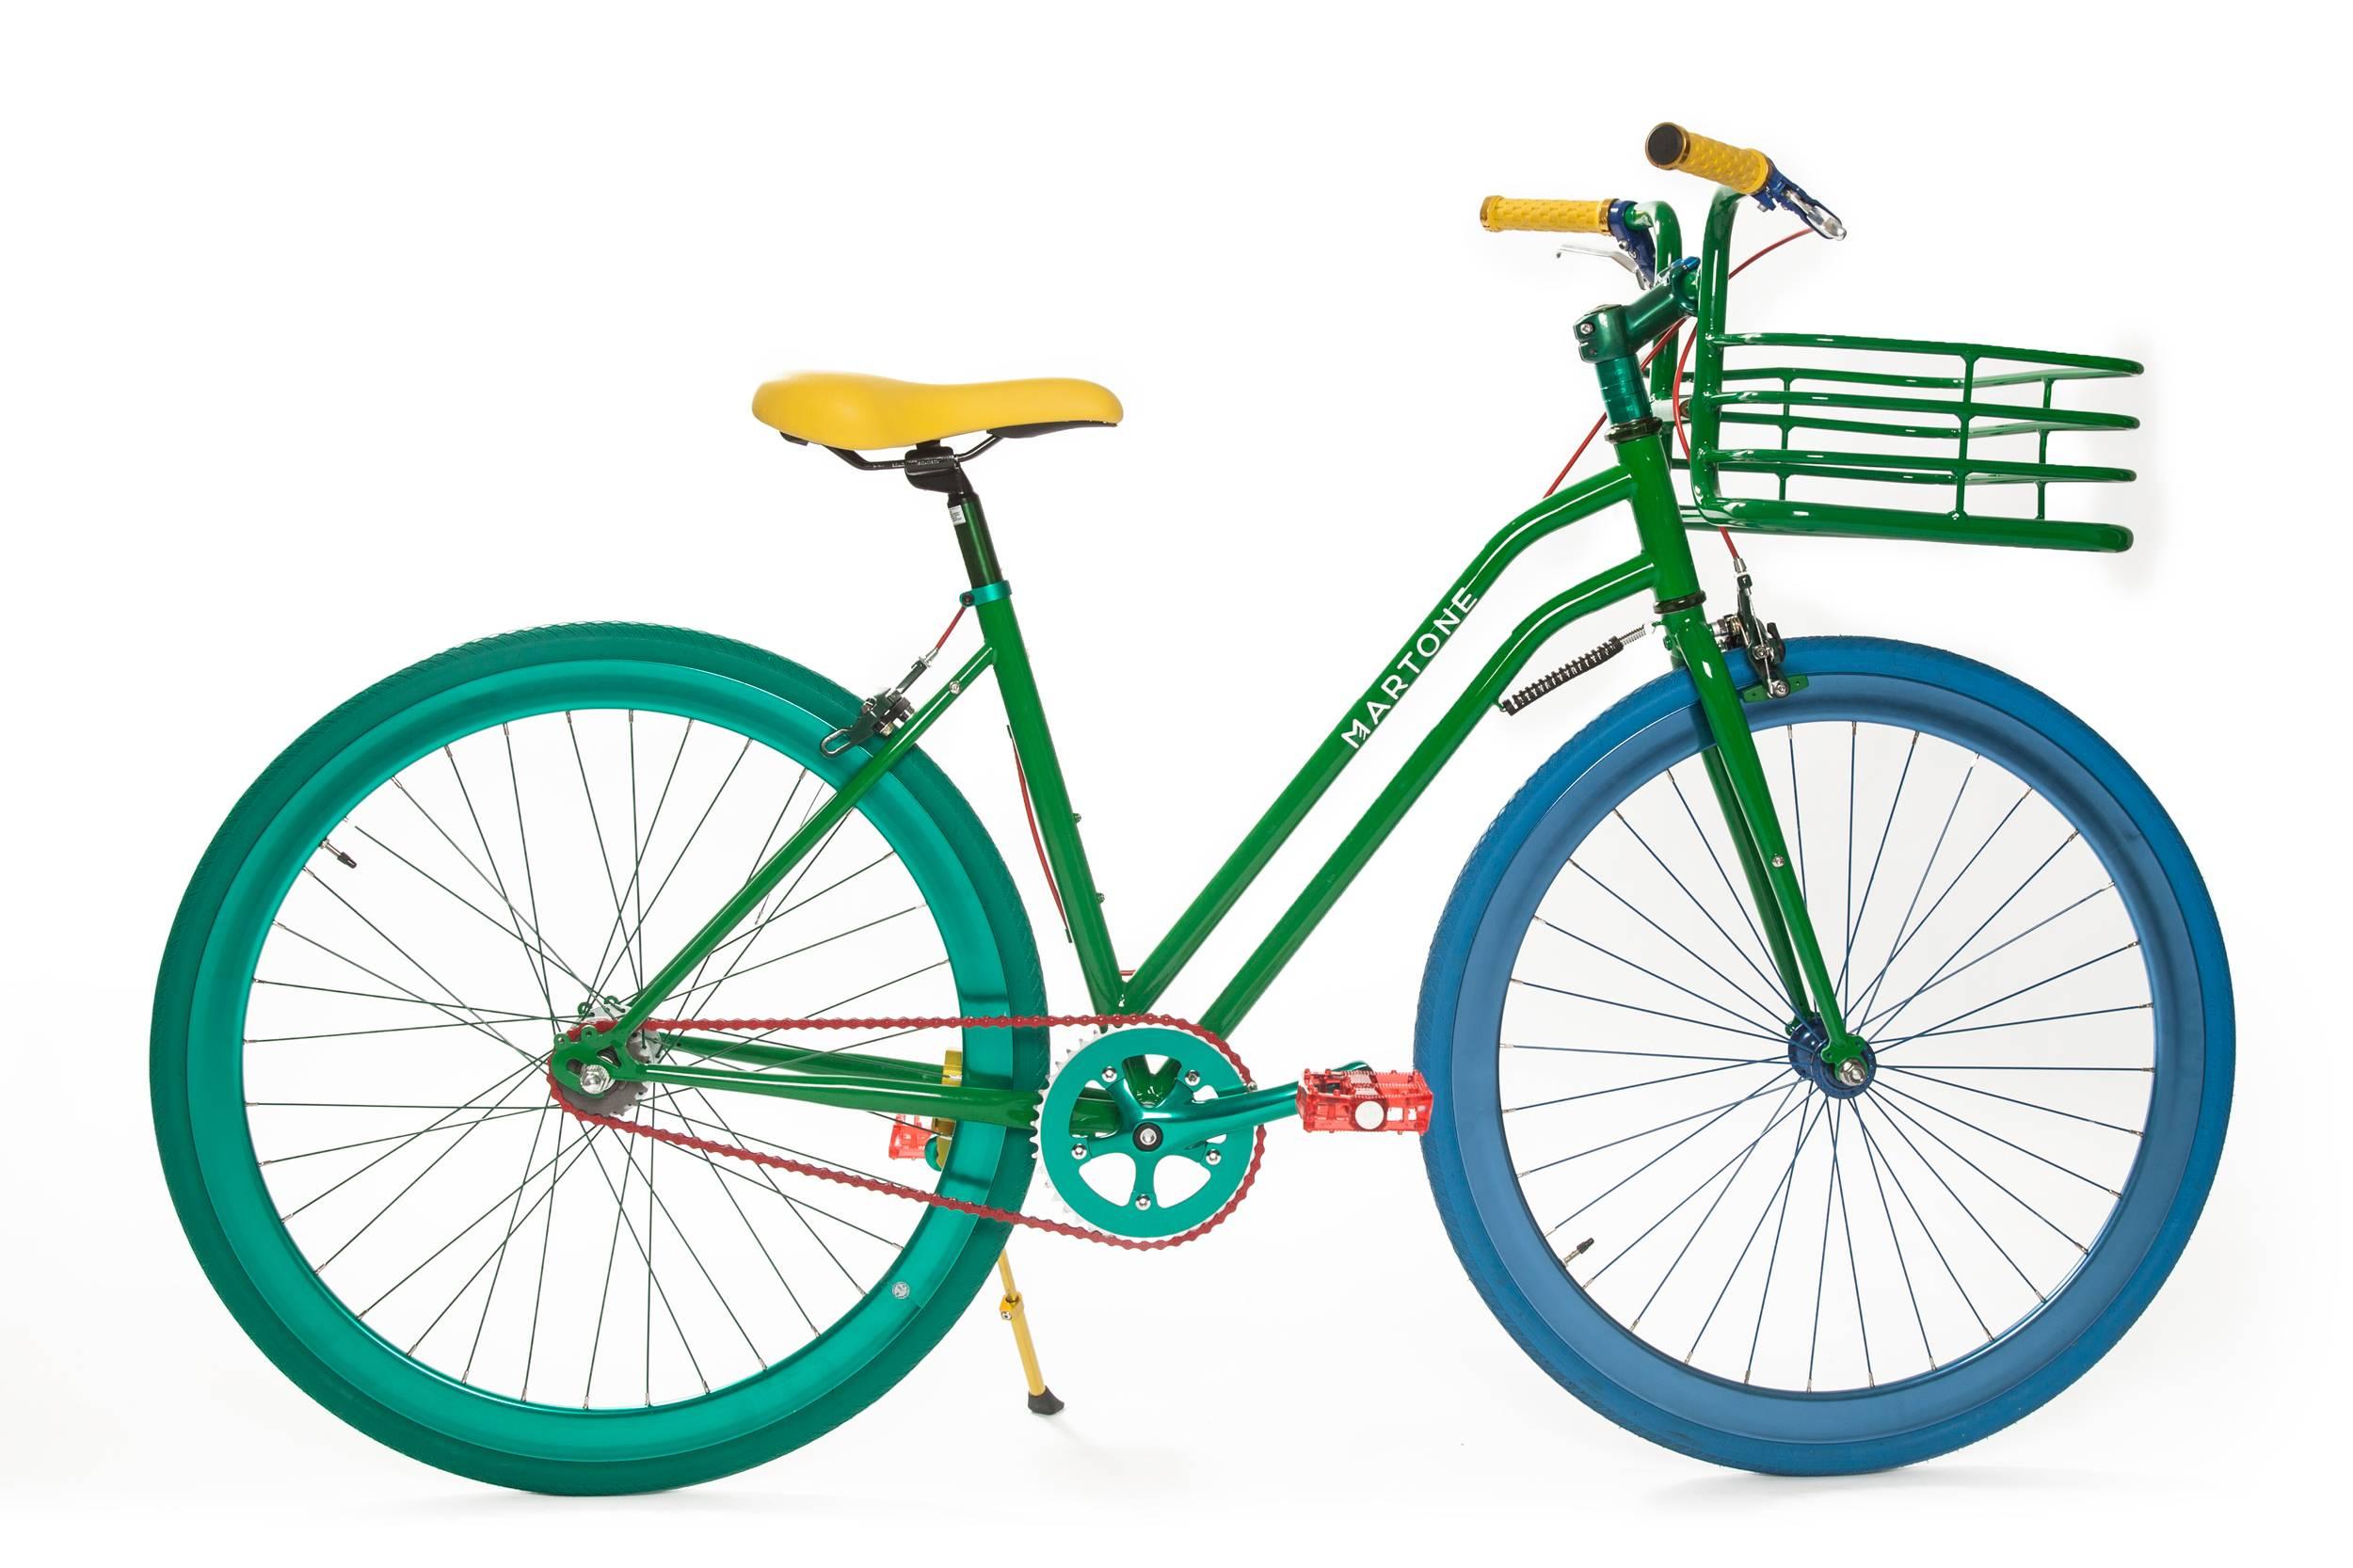 Martone Bicycle in Olympic Colors